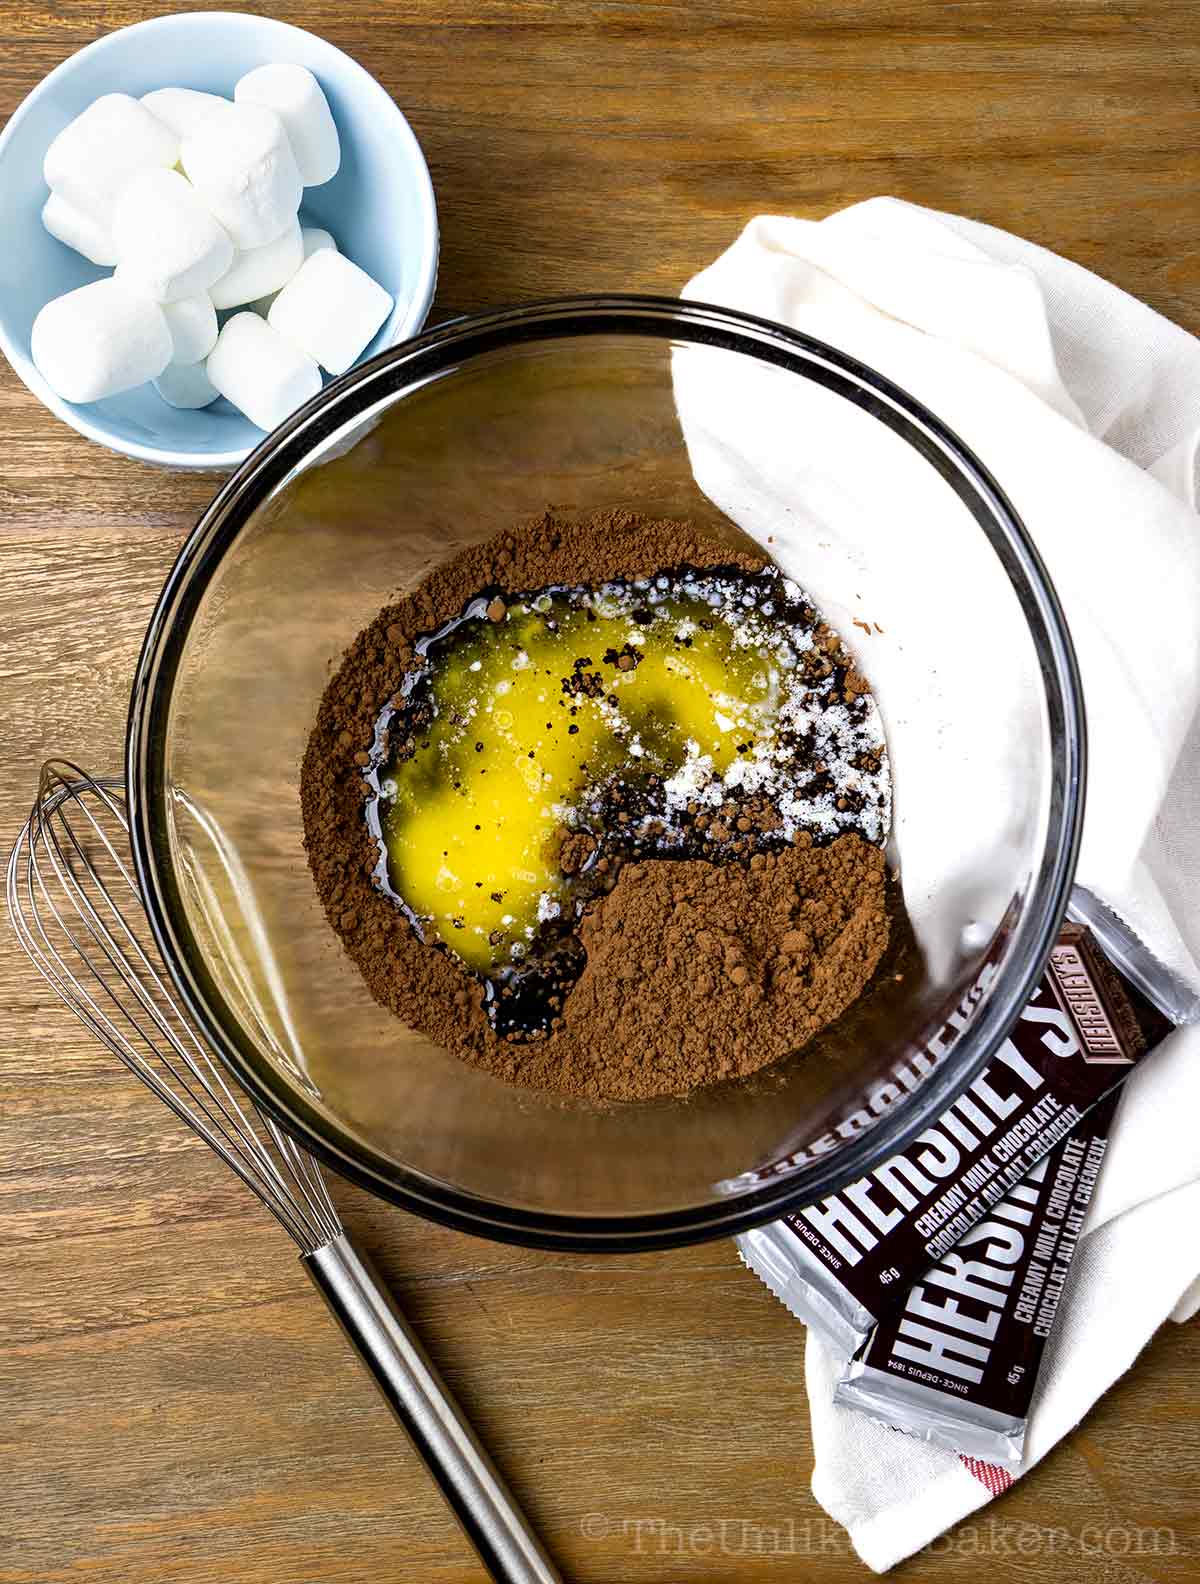 Melted butter and cocoa powder in a bowl.